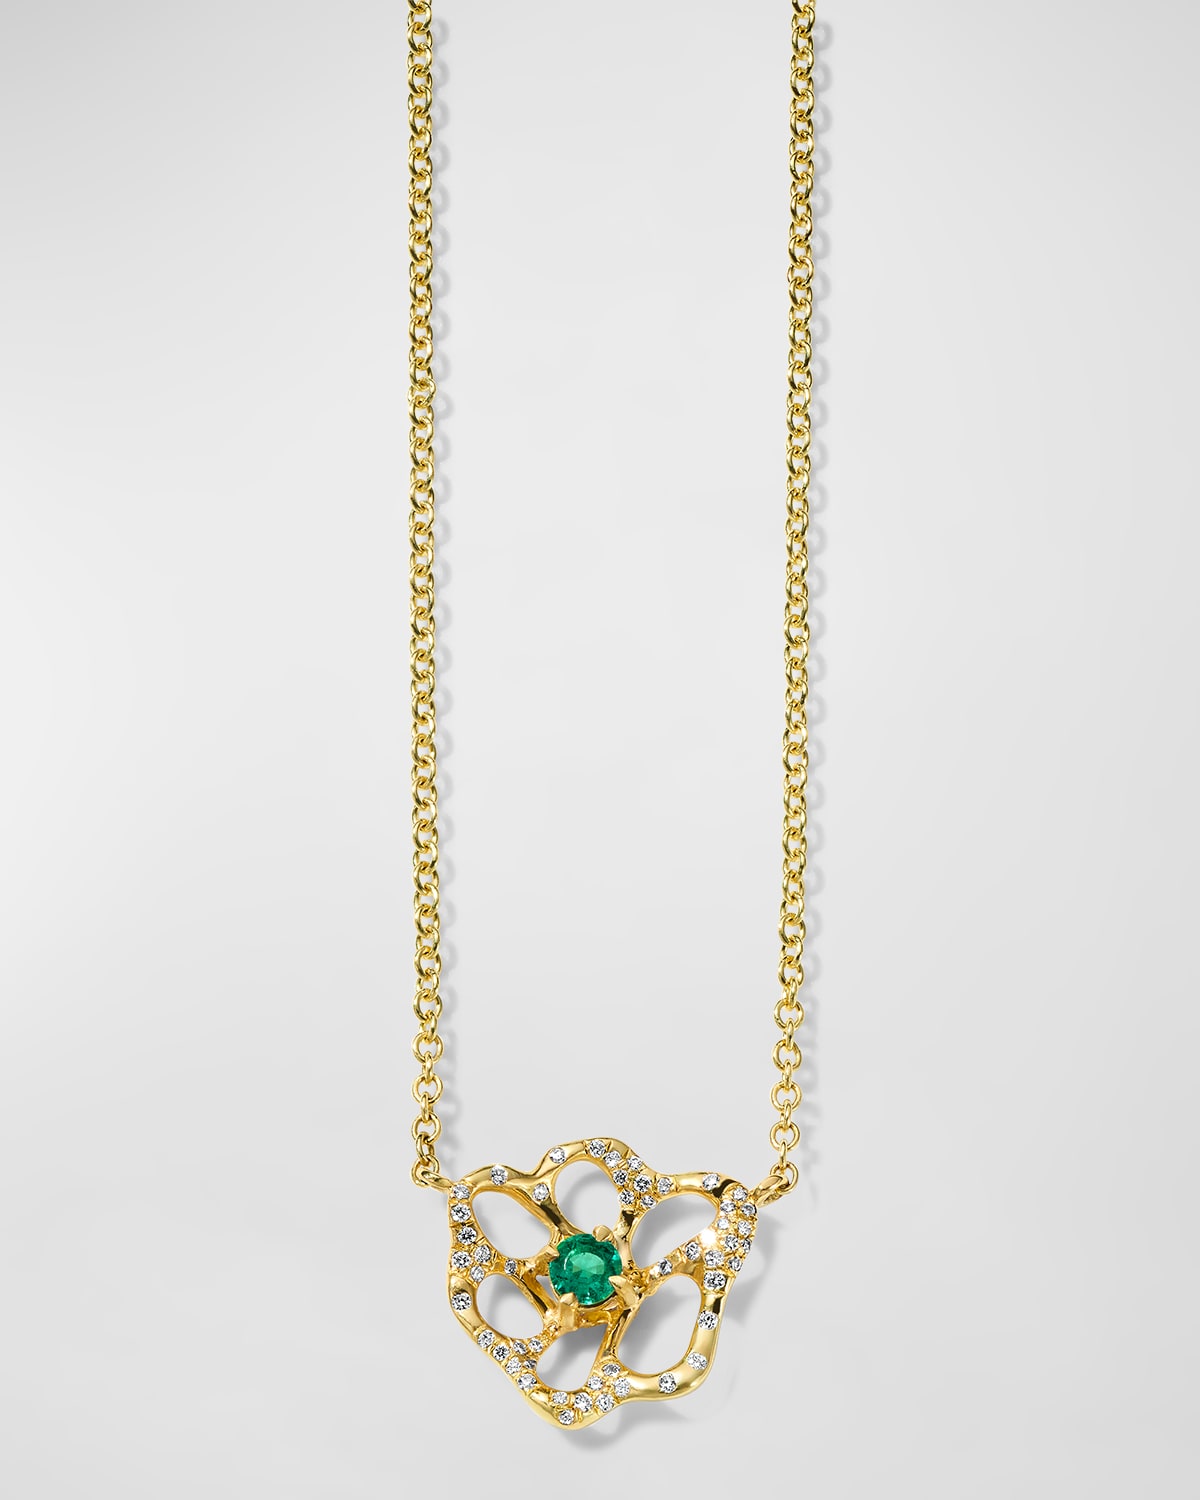 IPPOLITA 18K STARDUST DRIZZLE SMALL FLOWER NECKLACE WITH GREEN EMERALD AND DIAMONDS